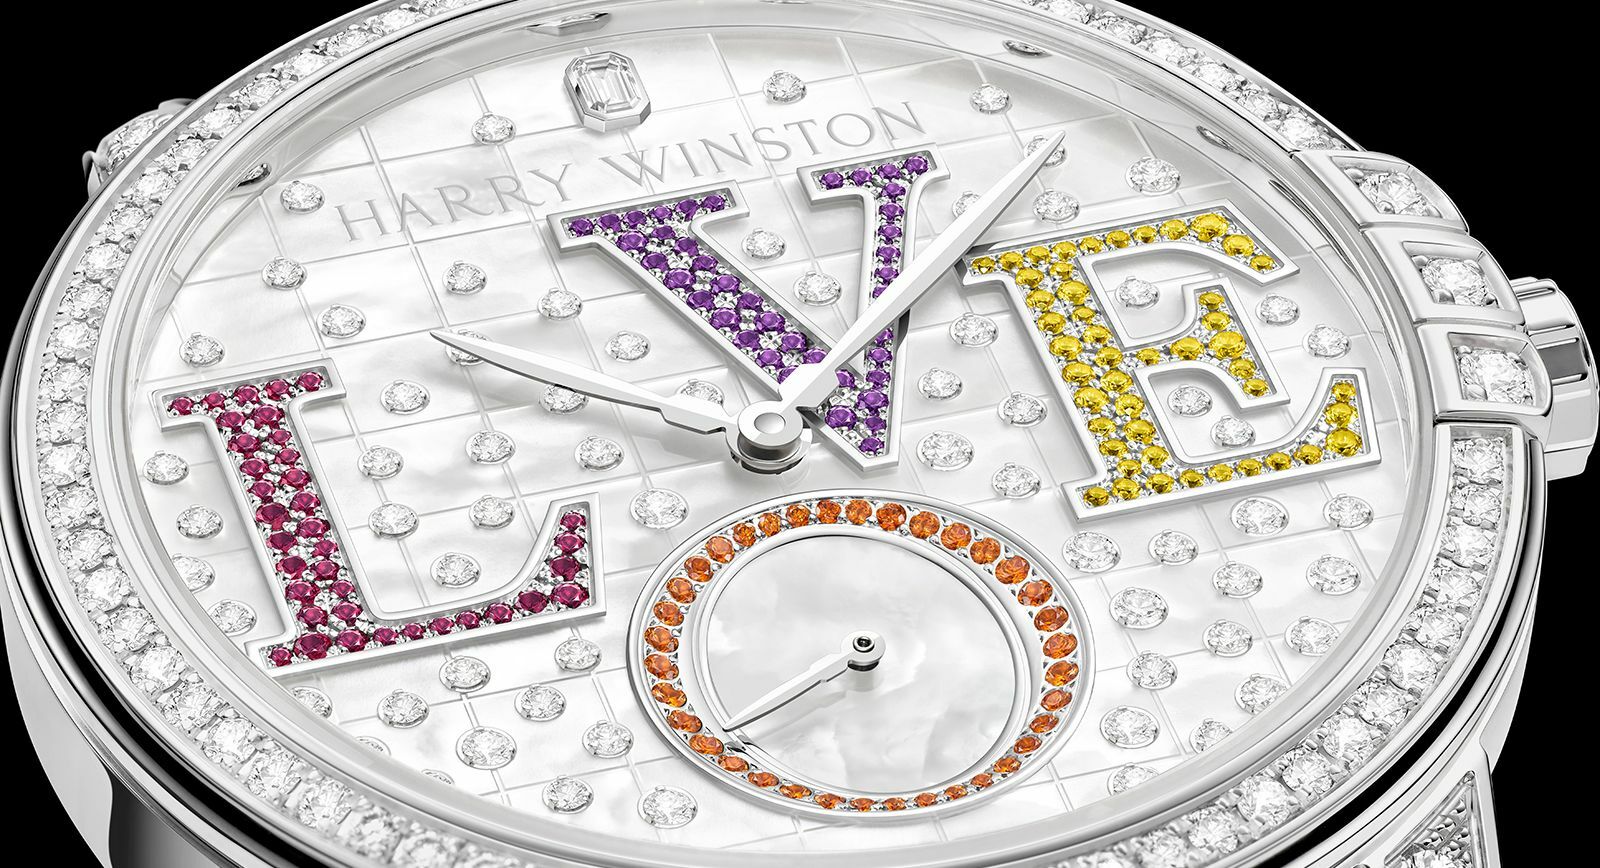 Harry Winston Midnight Winston With Love automatic timepiece in white with a beaded mother of pearl dial, 69 brilliant-cut diamonds, 47 yellow sapphires, 42 amethysts, 37 rubies, 36 spessartites, and an emerald-cut diamond